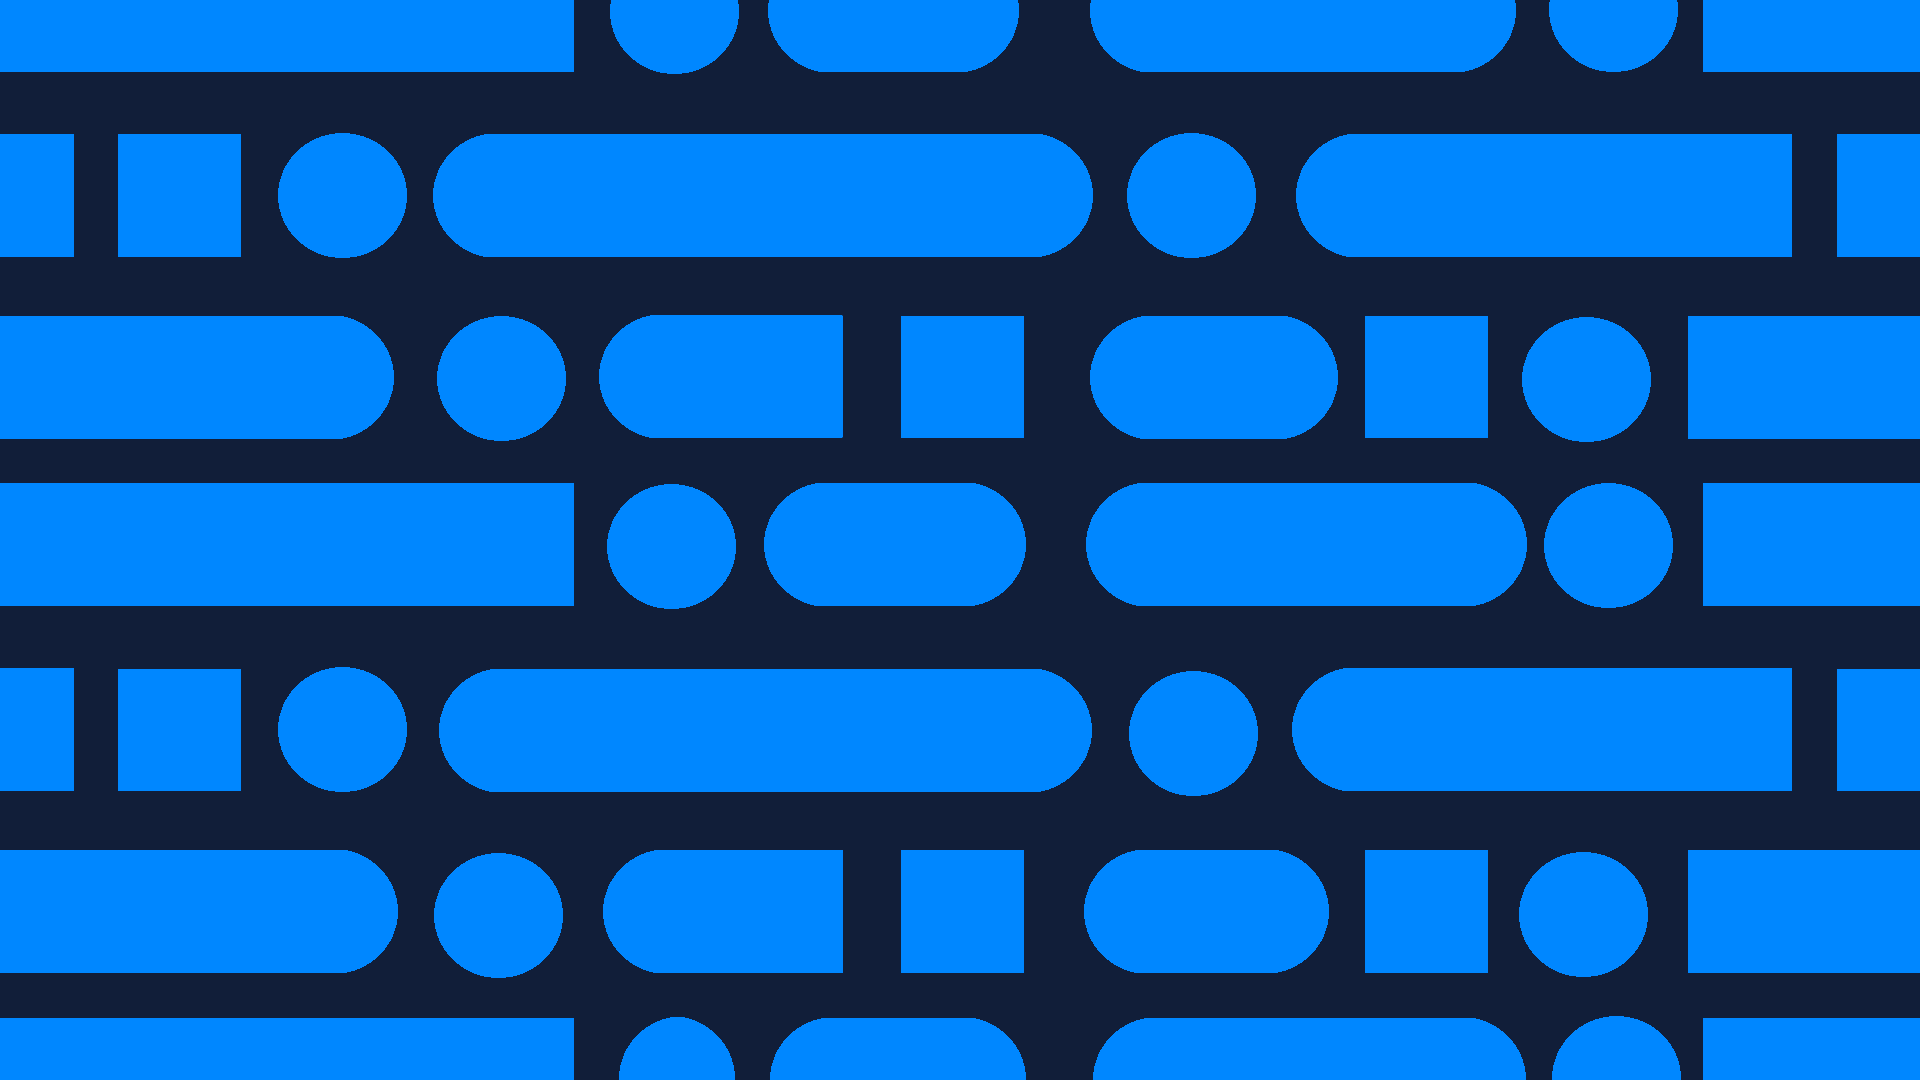 Abstract illustration of blue circles and ellipses